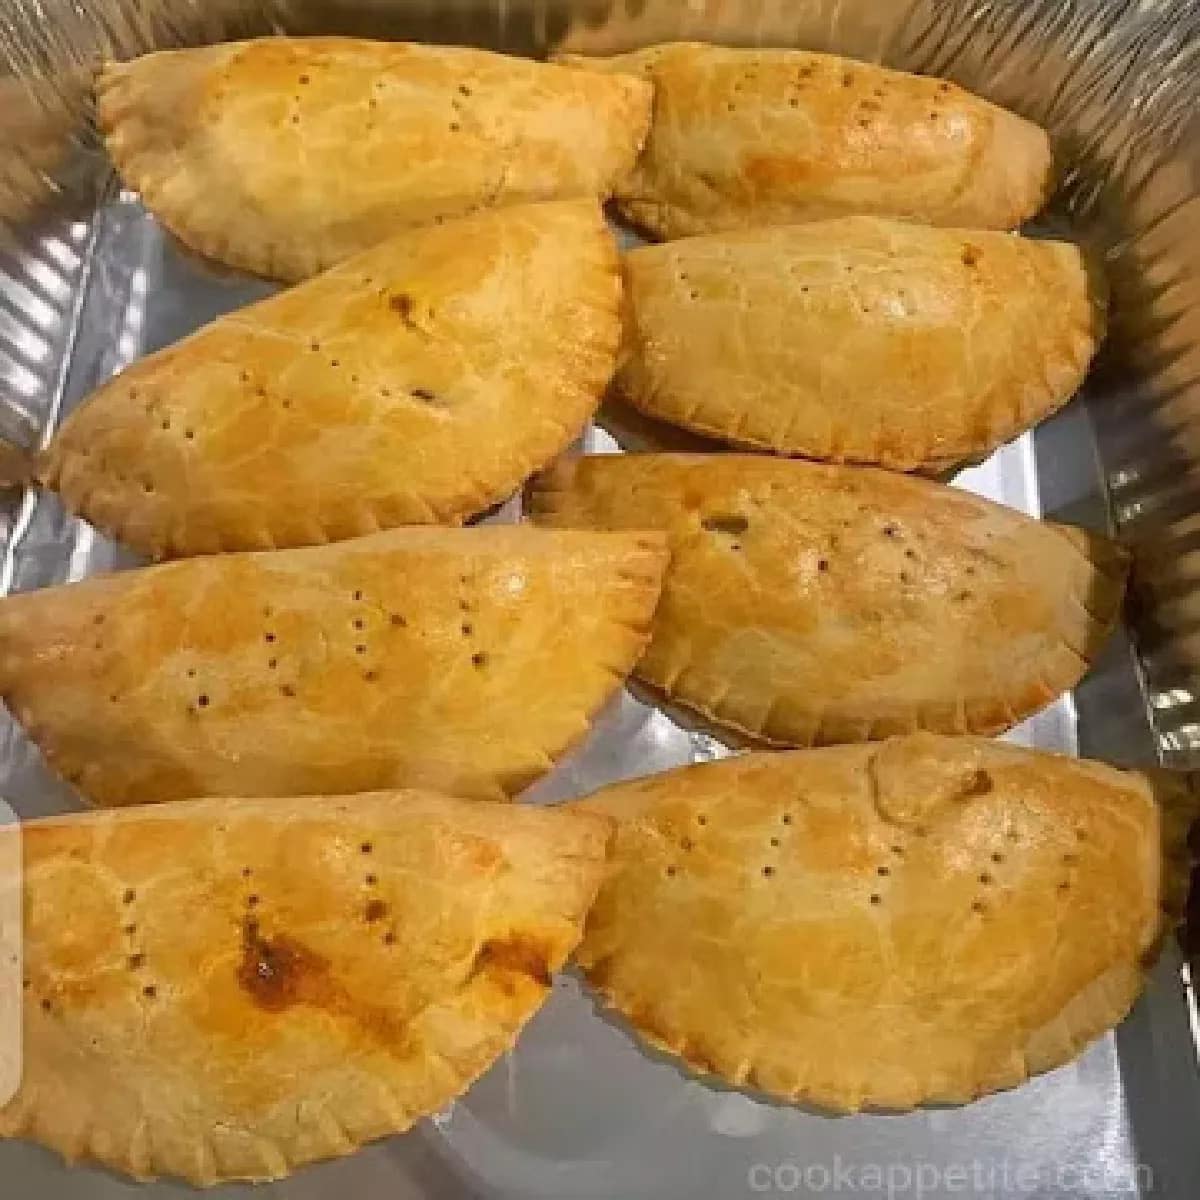 Meat pie or beef pie is a pie stuffed with minced meat and vegetables like potatoes, carrots, and green beans and flavored with seasoning such as beef stock, black pepper, etc. Meat pie recipe come in many variations from a kidney pie, to a shepherd's depending on the country of origin.